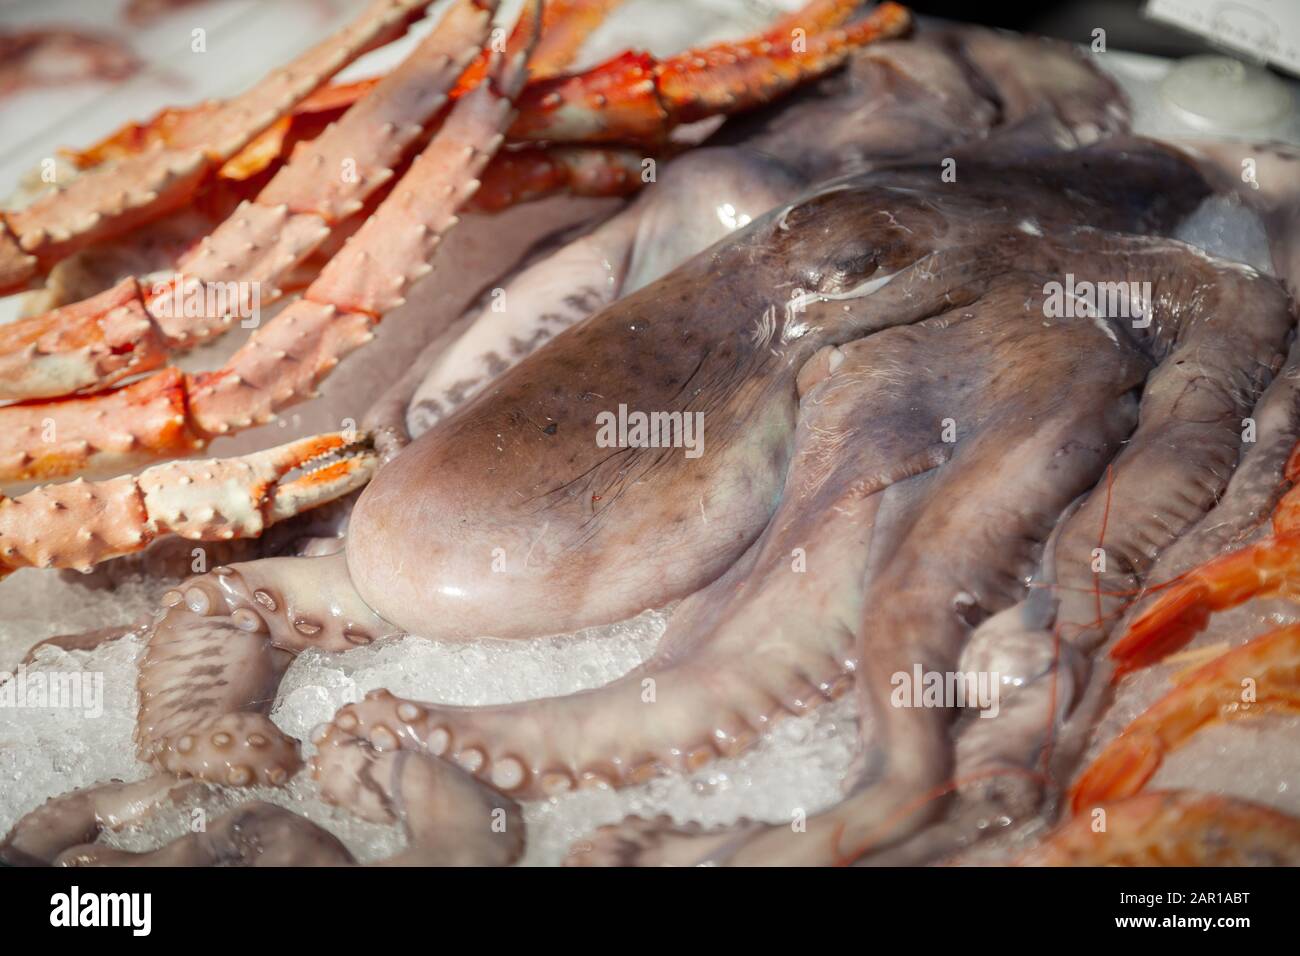 Fishing market with fish, seafood. Fresh octopus, crabs are laid out on  ice for sale Stock Photo